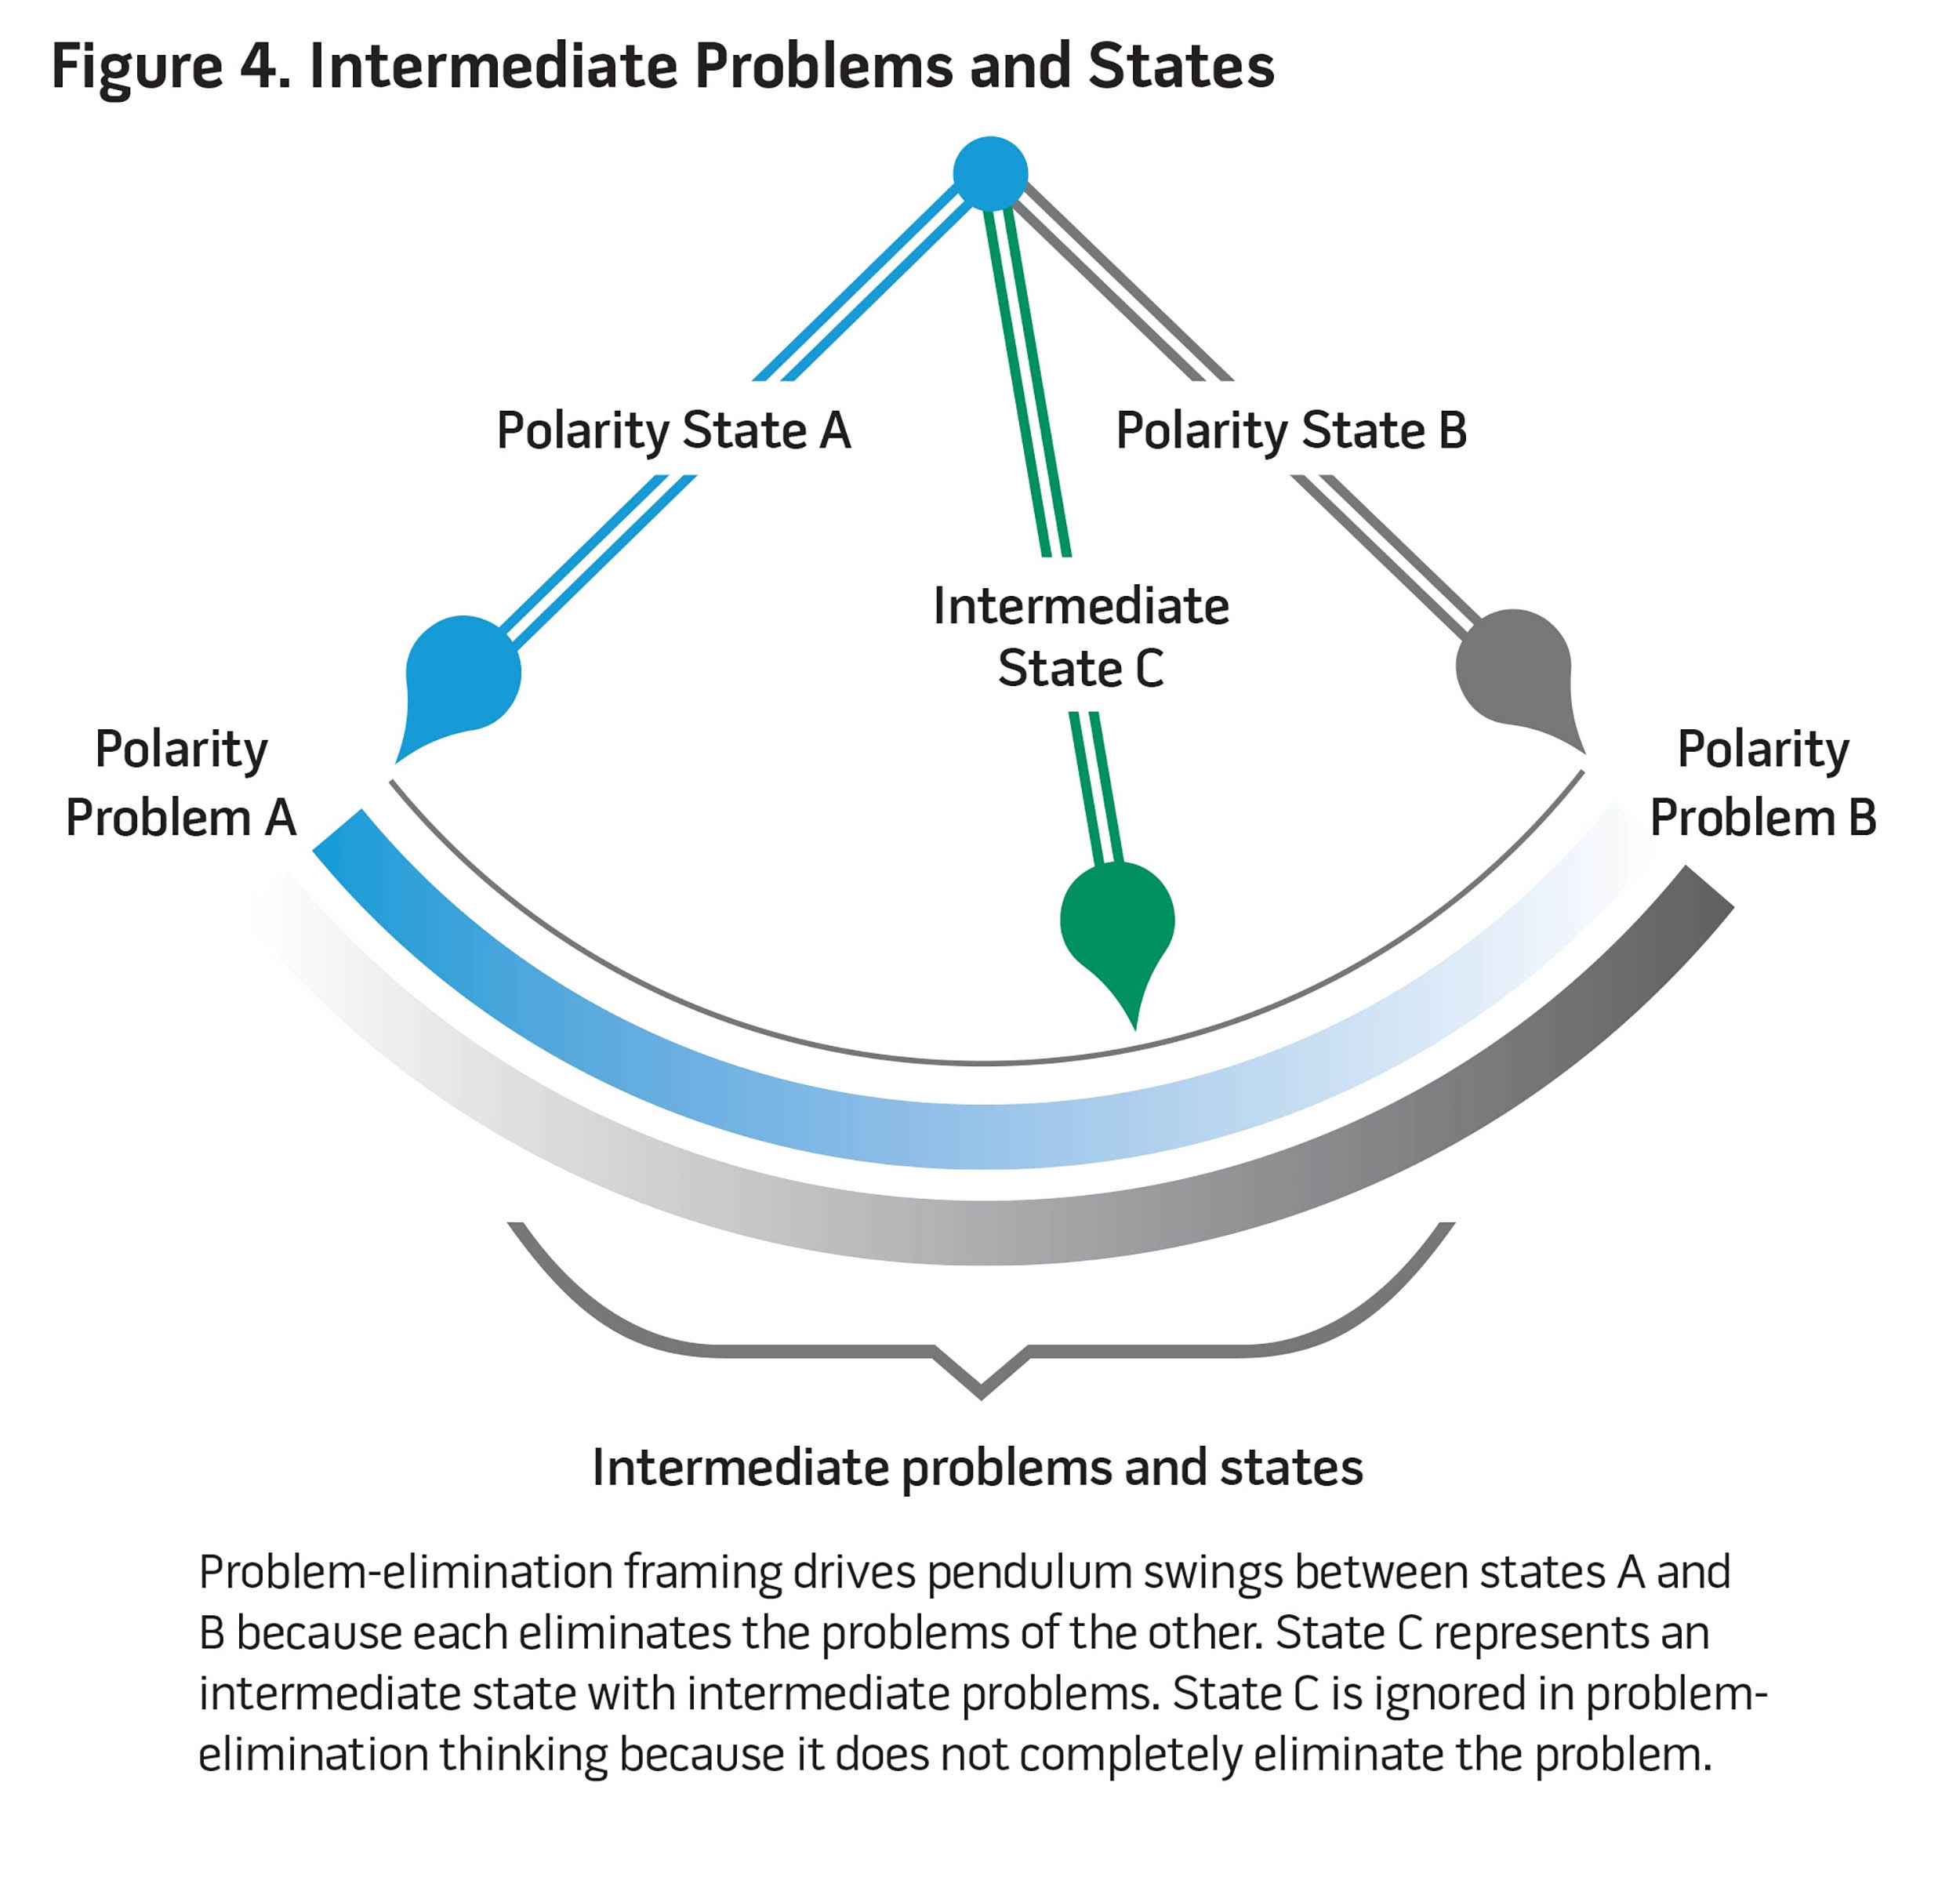 Figure 4. Intermediate Problems and States